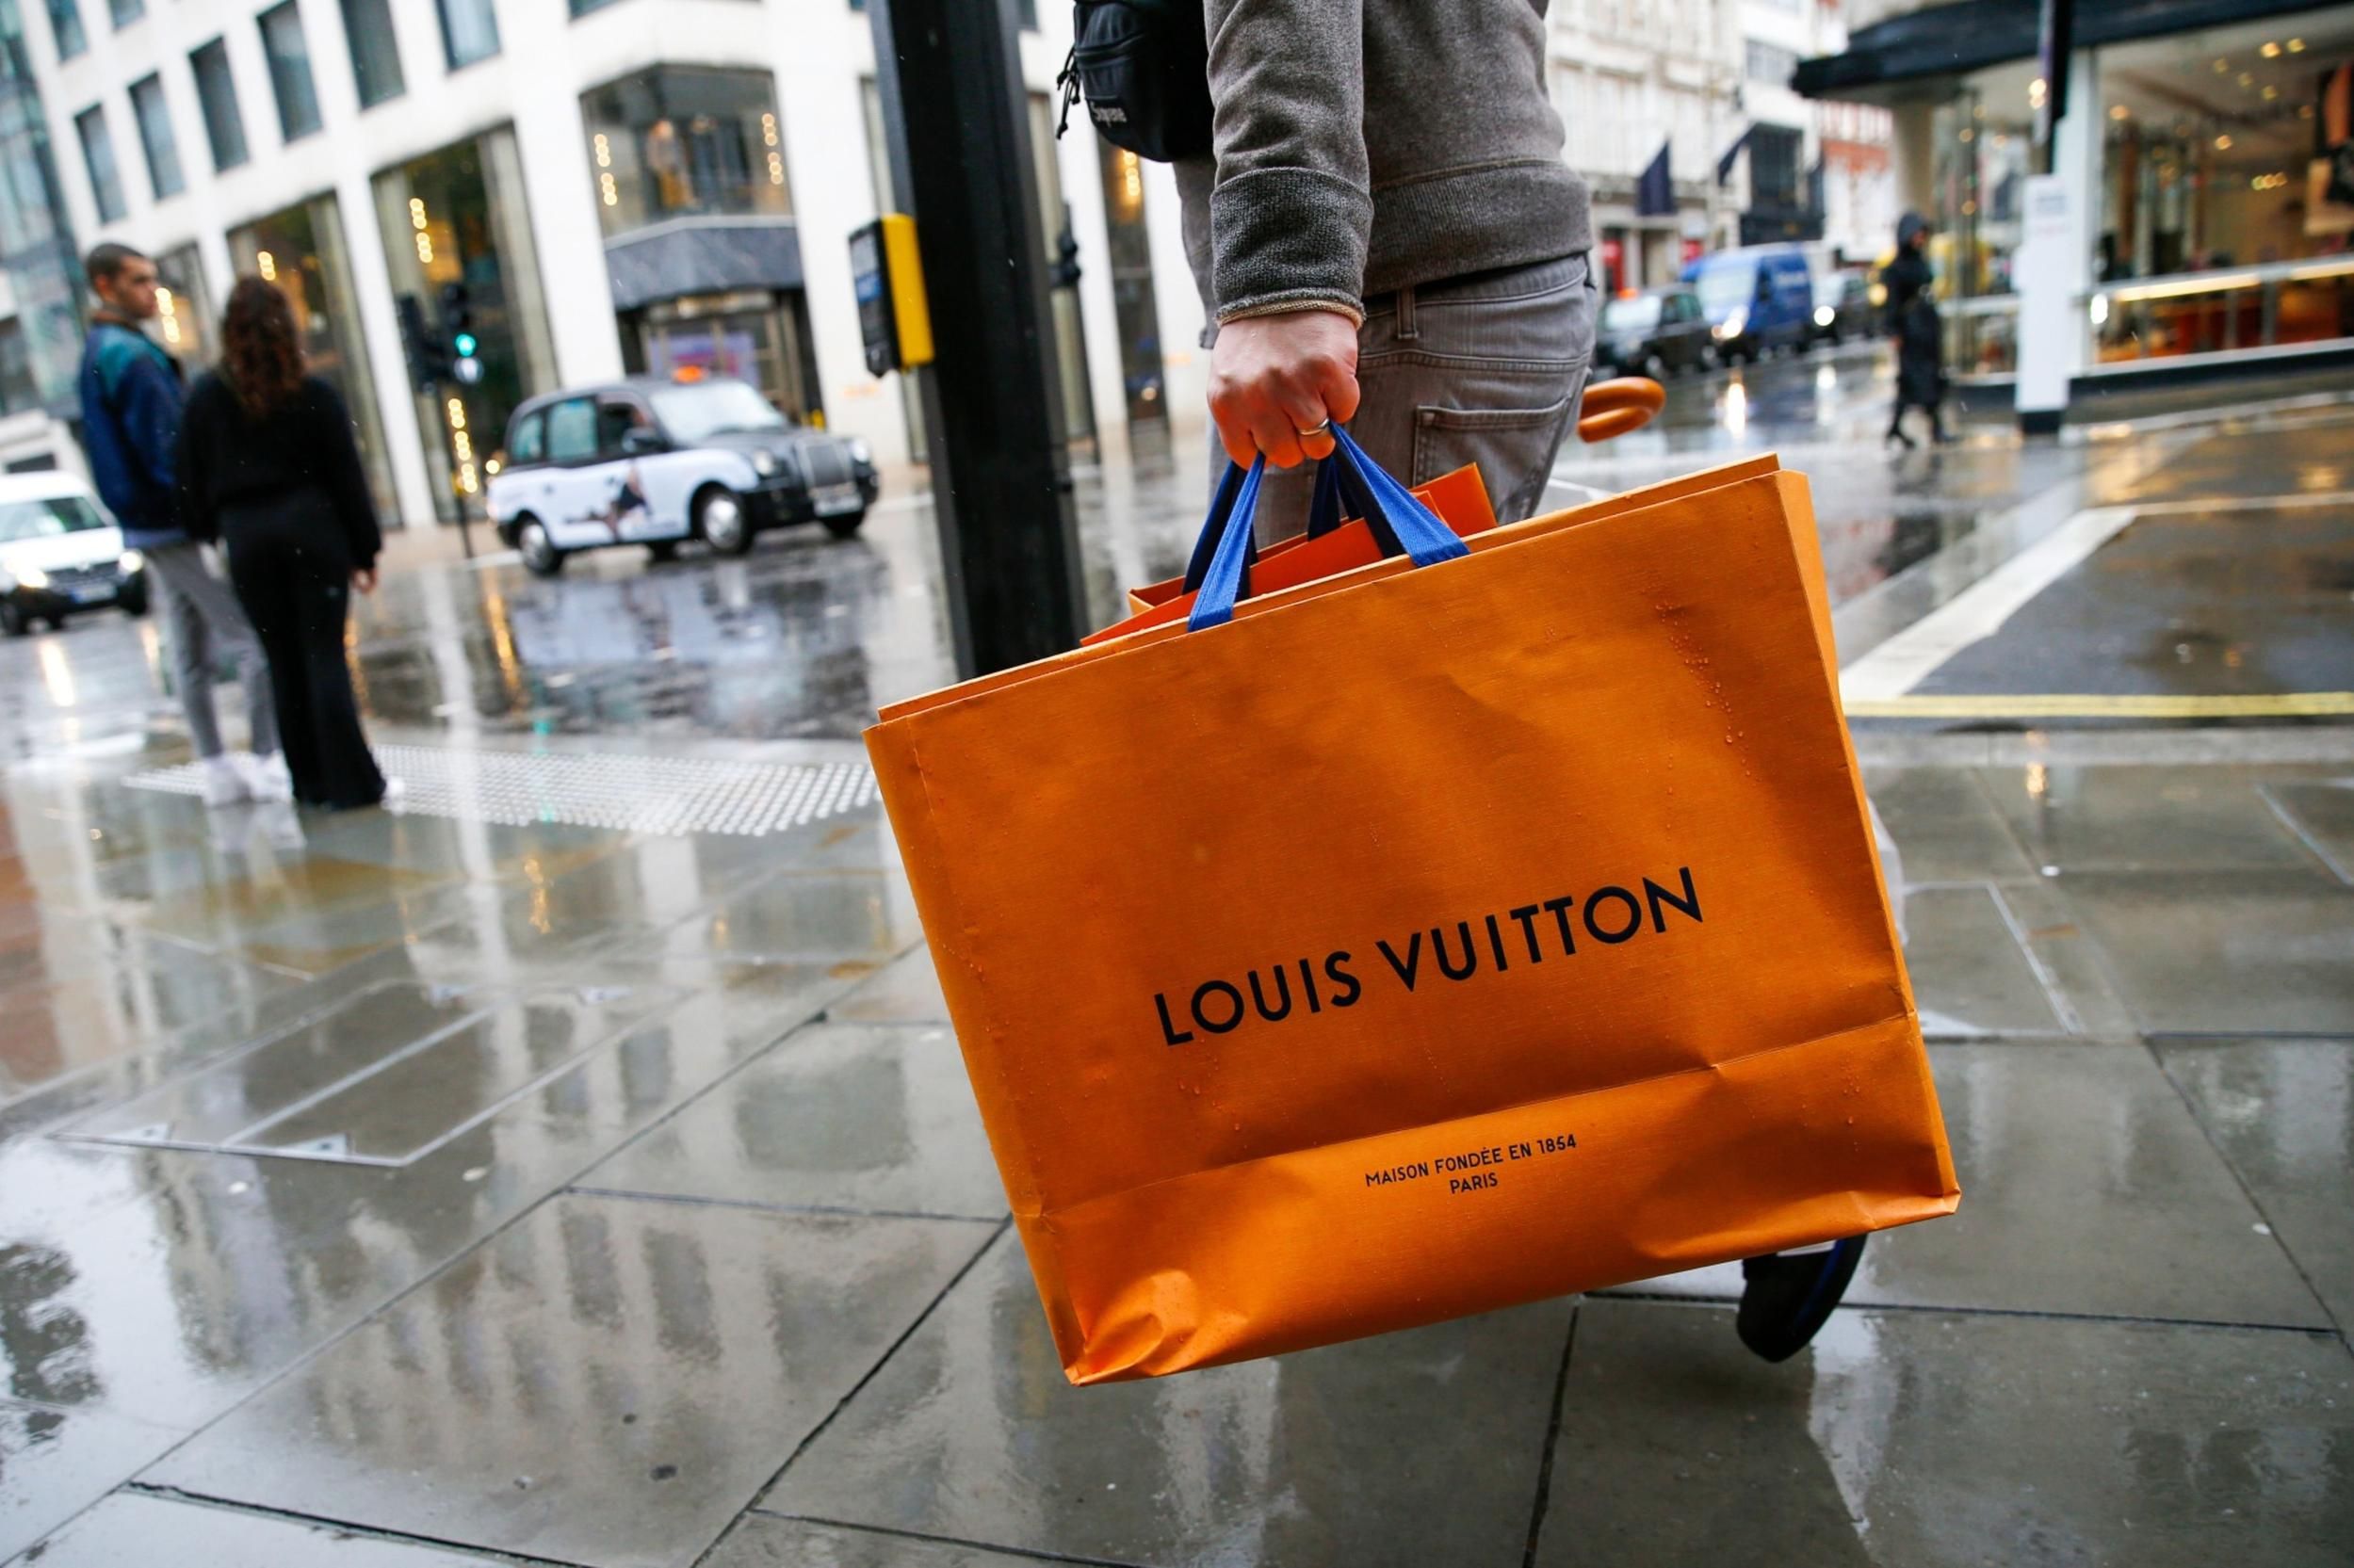 Louis Vuitton e-sales soar amid lockdown yearning for 'bling